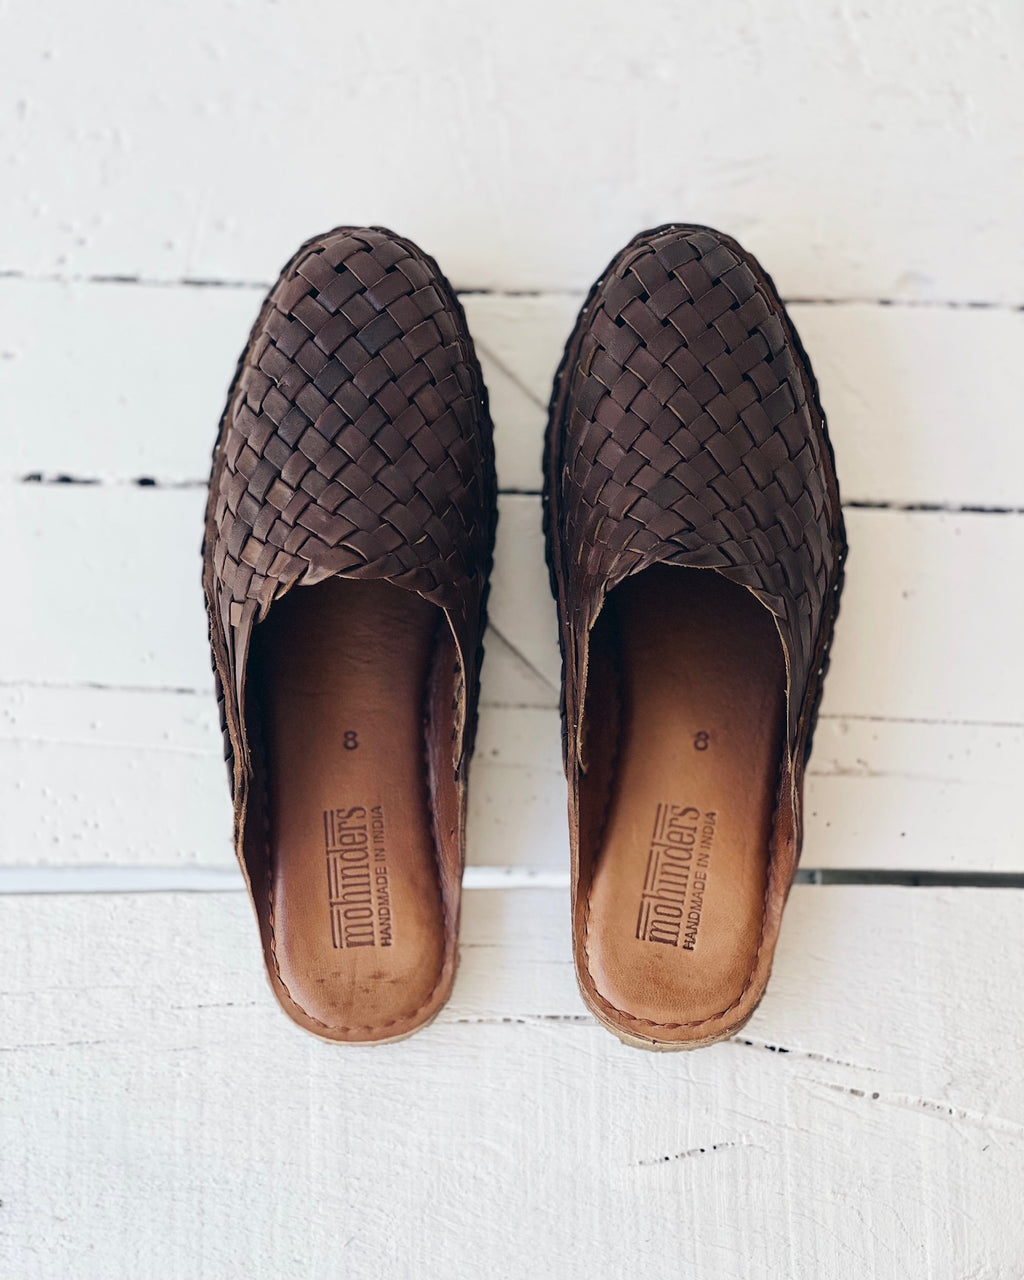 Men's Woven Leather Shoe, Oiled Leather, Mohinders